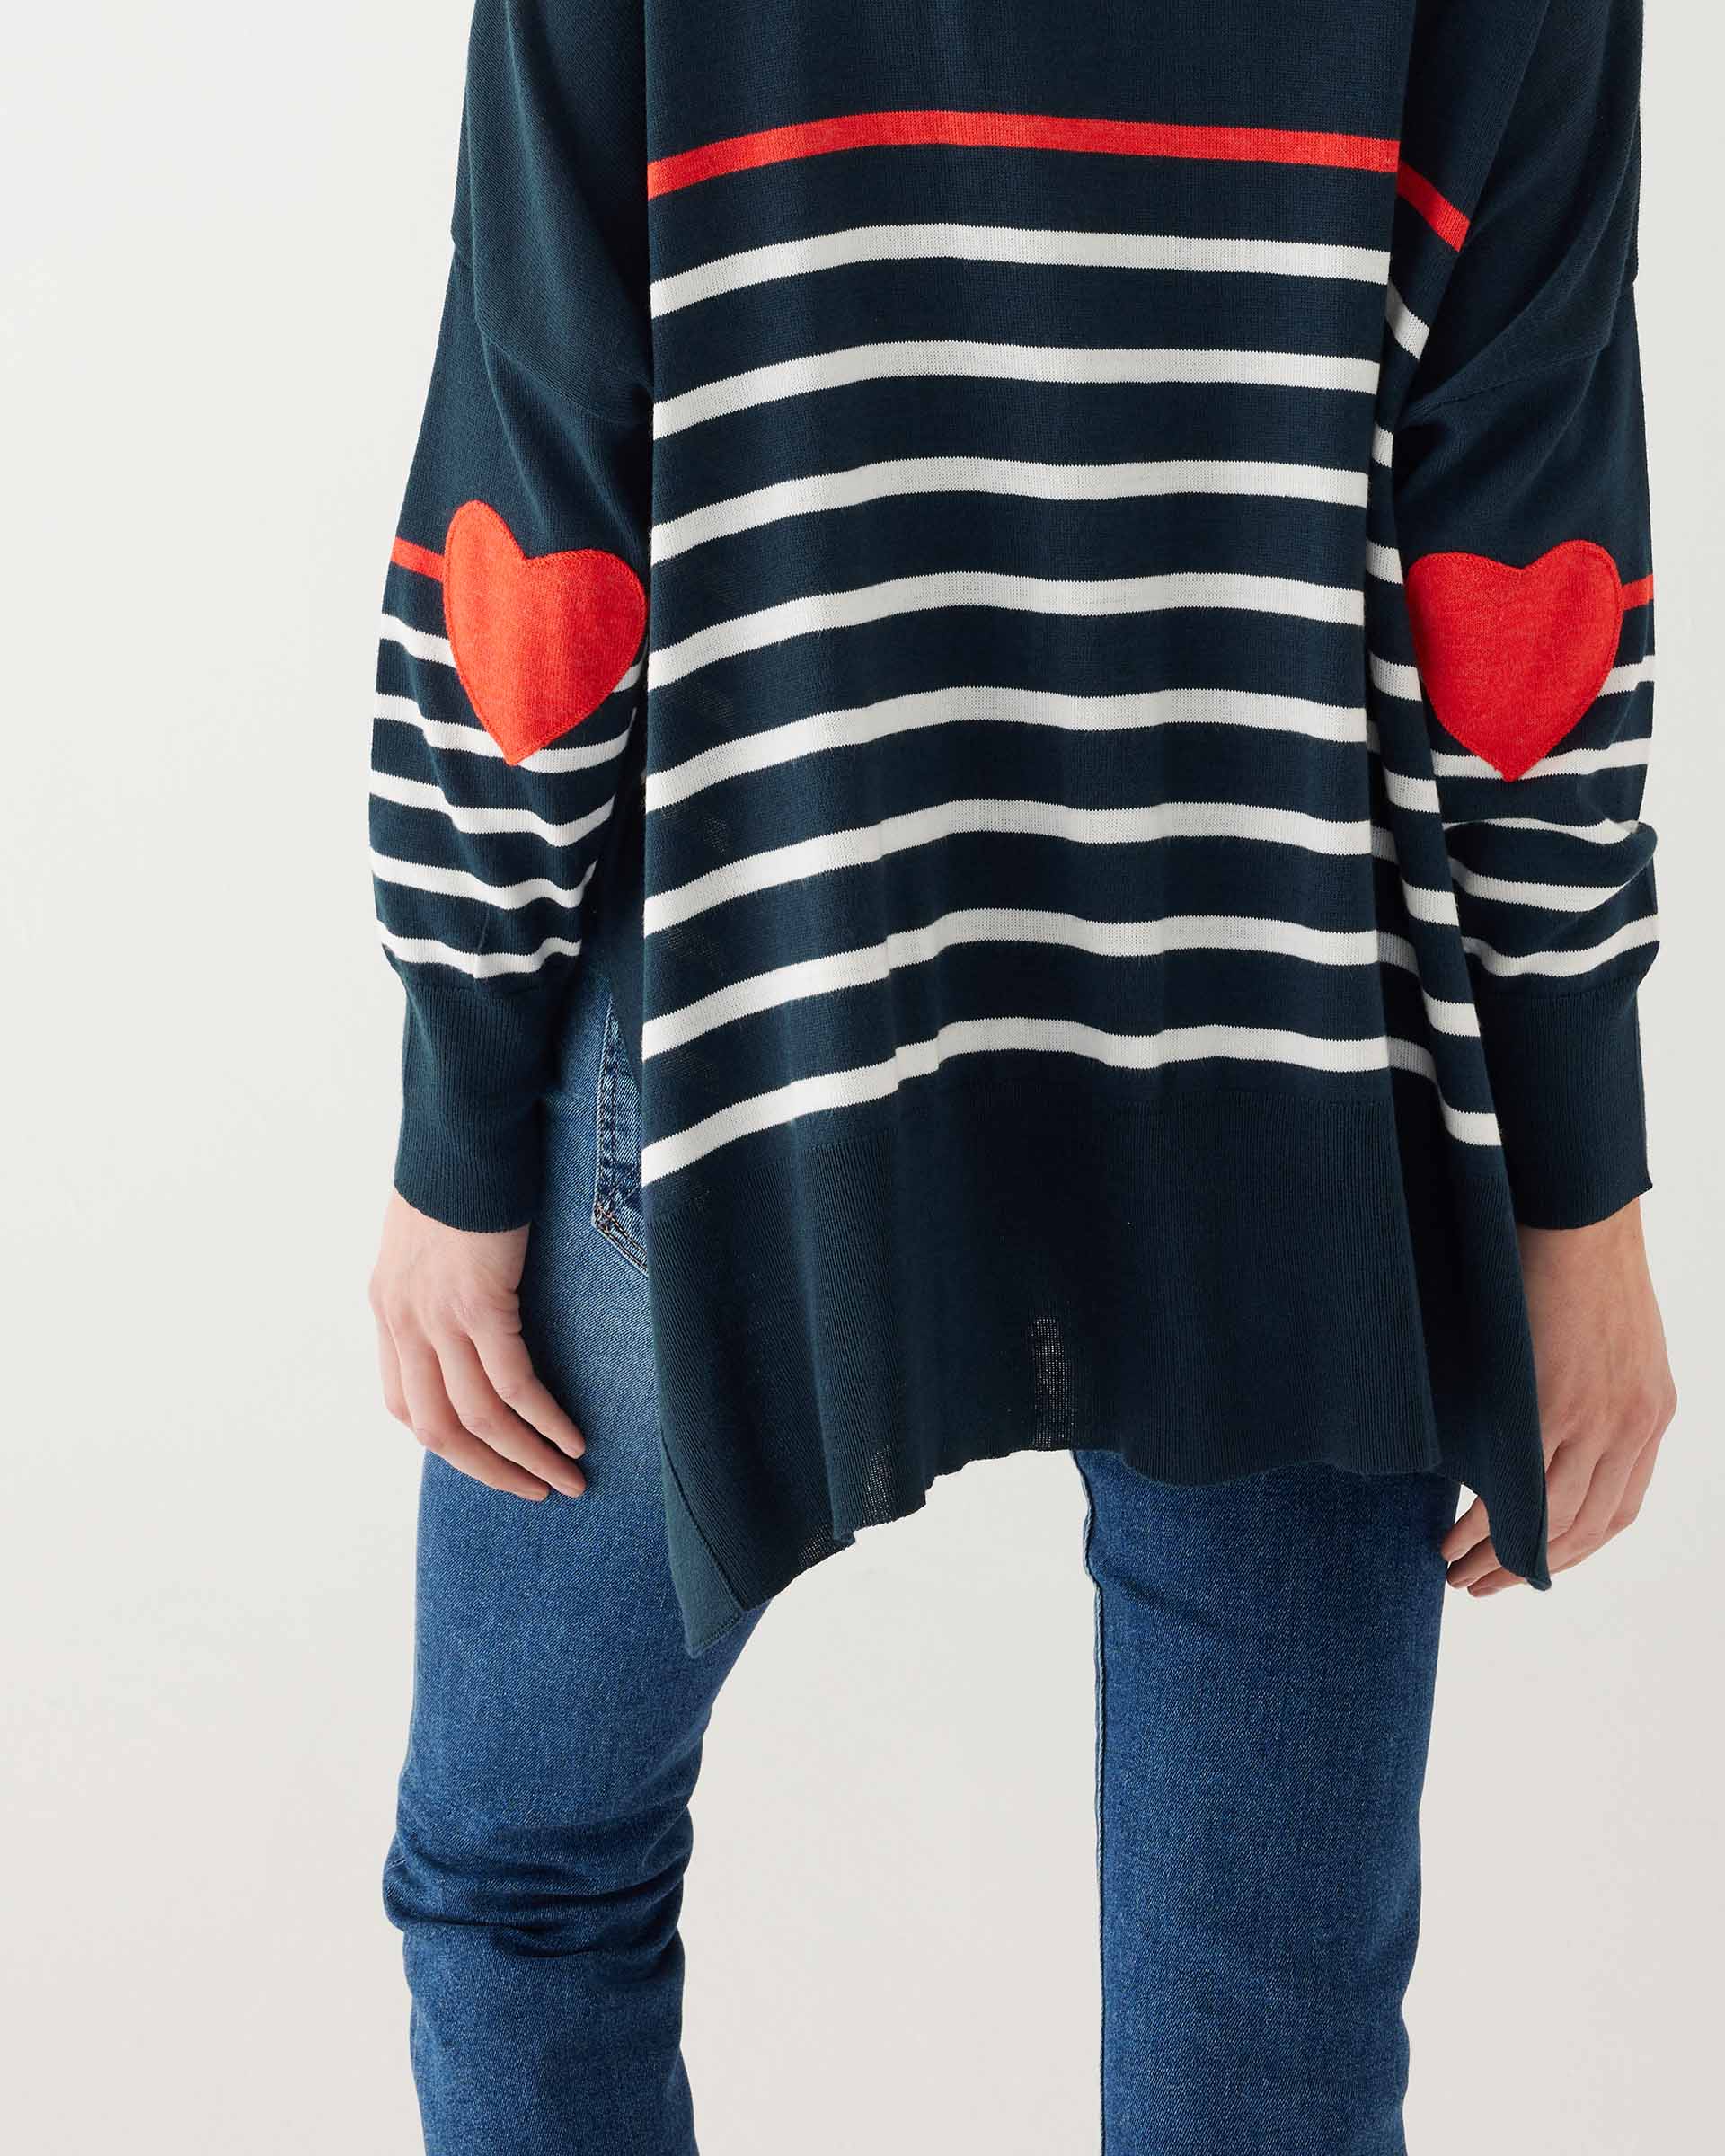 female wearing navy sweater with white stripes & red heart elbow patch backward on white background